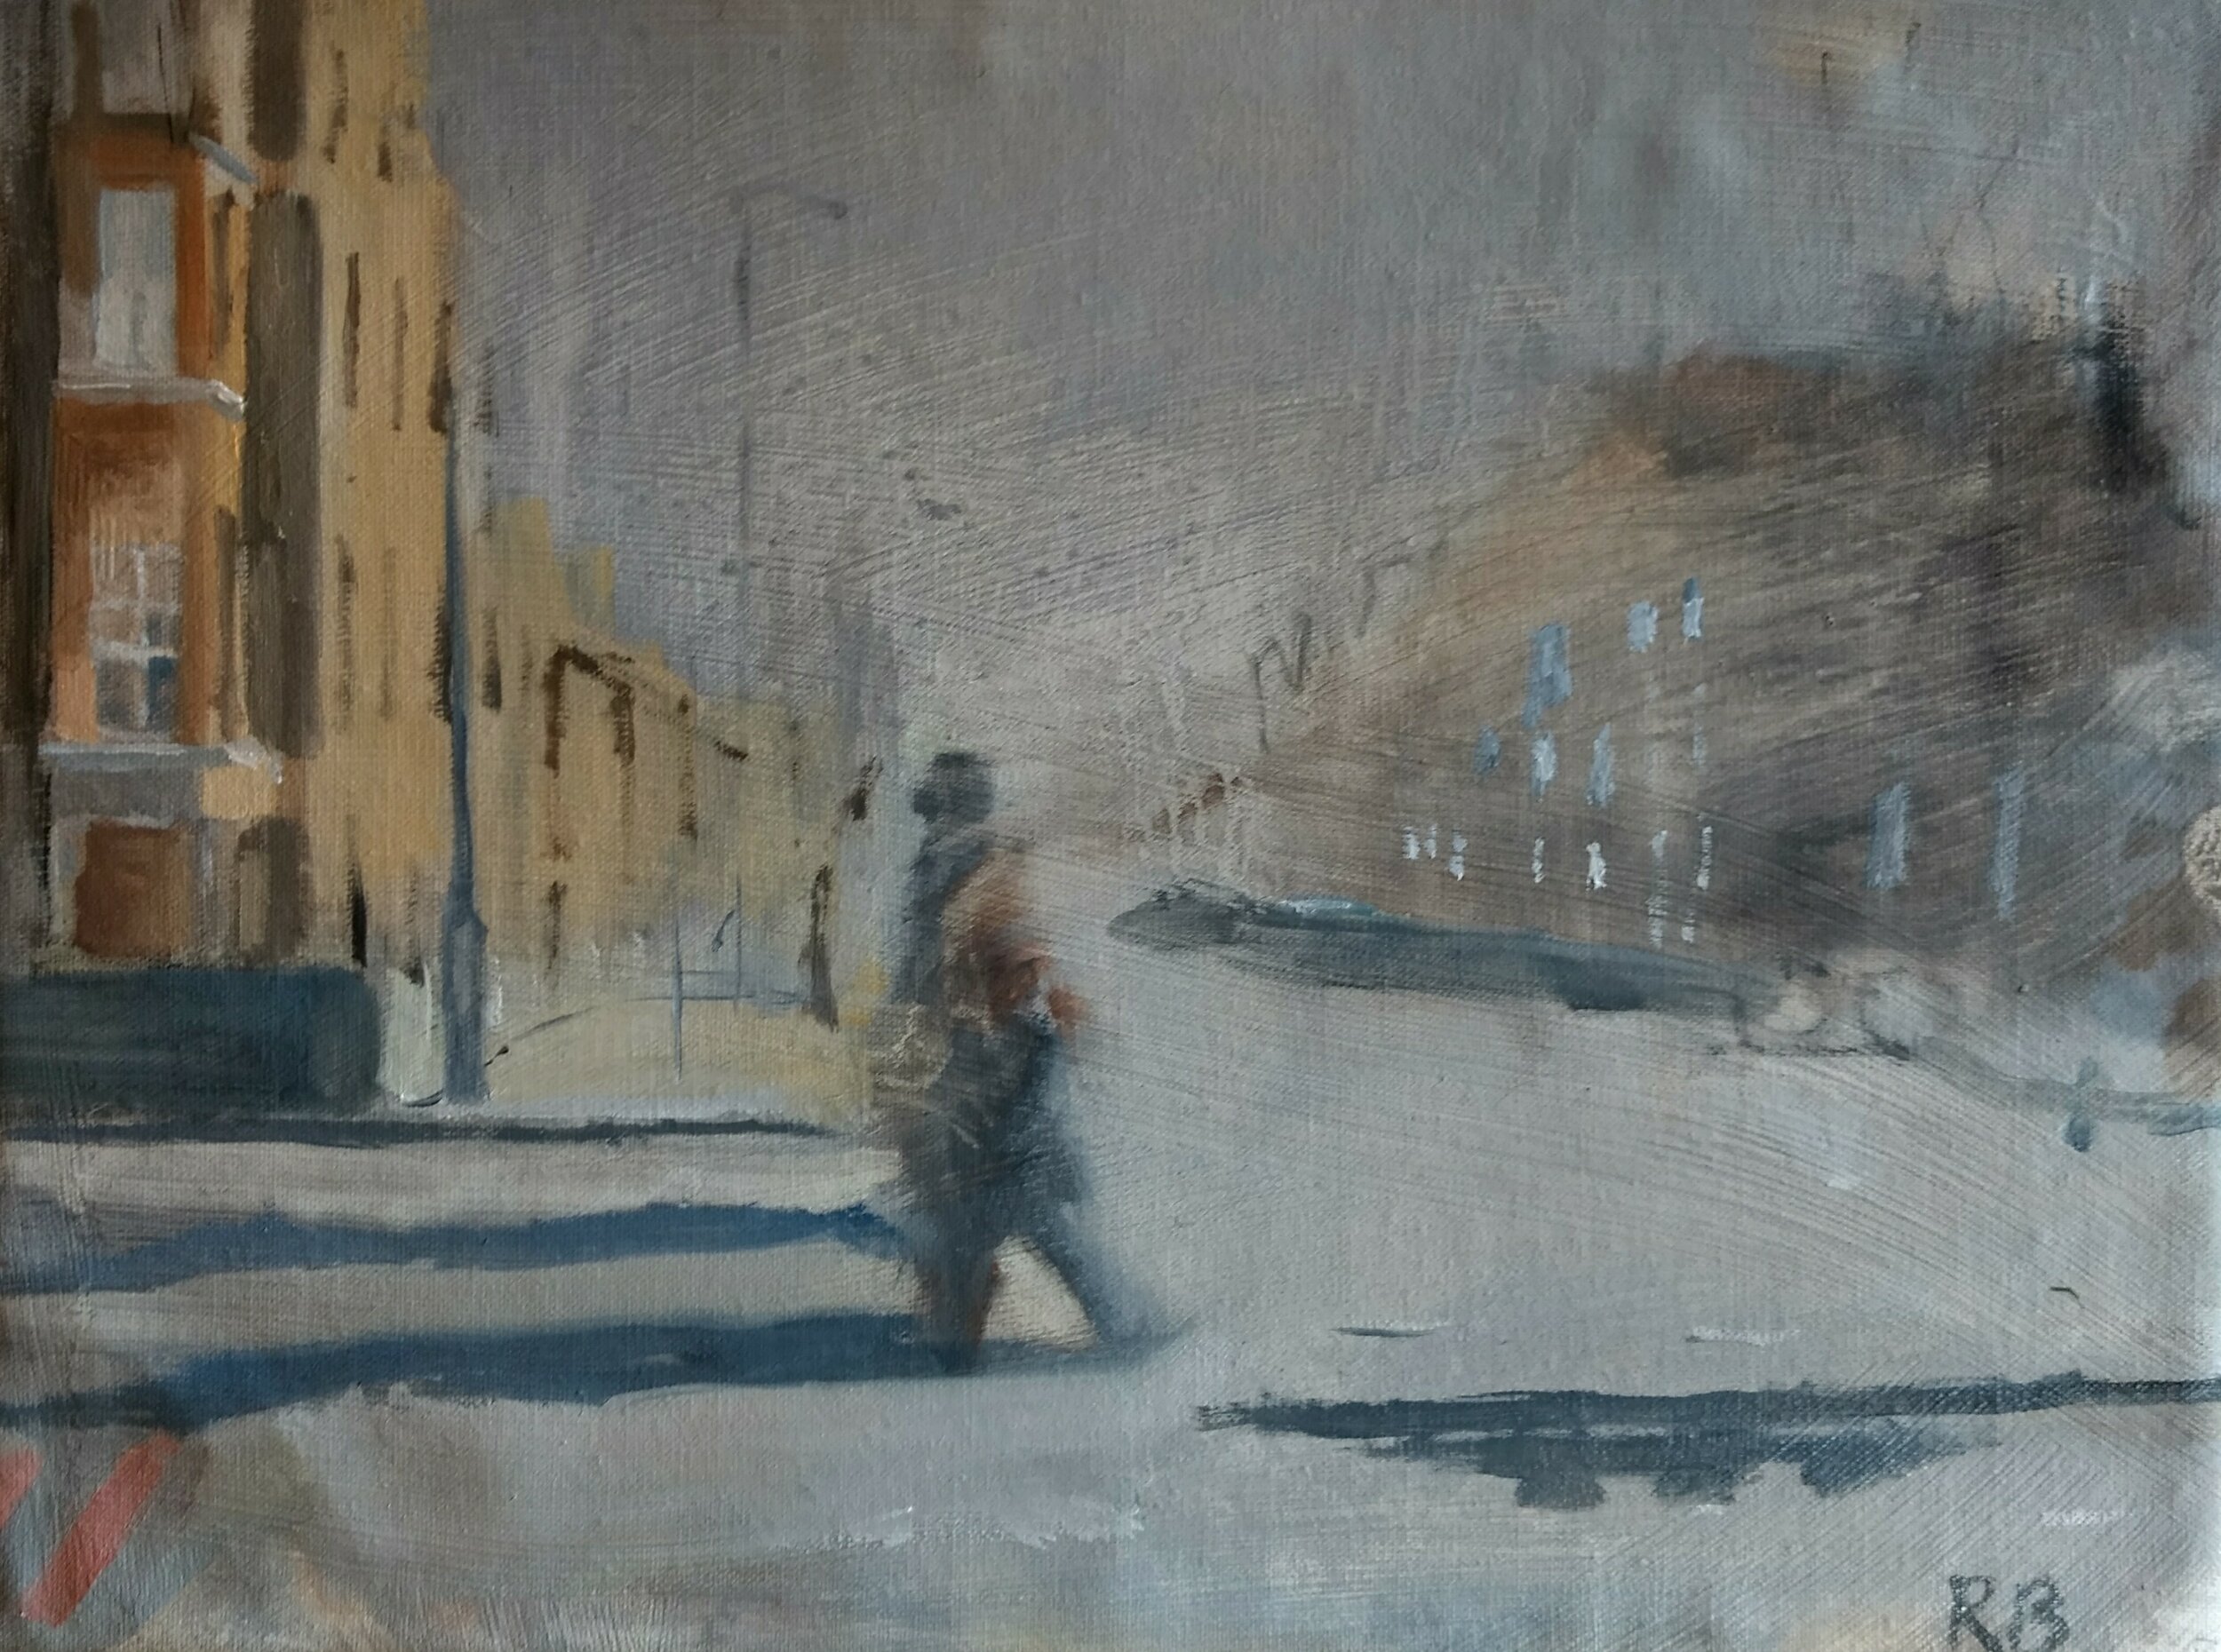  Pedestrian in Battersea  Oil on board  40x30 cms  £375  An atmospheric cityscape featuring a lone, indistinct figure in the foreground crossing a London street. Lighting and long shadows punctuate this composition 